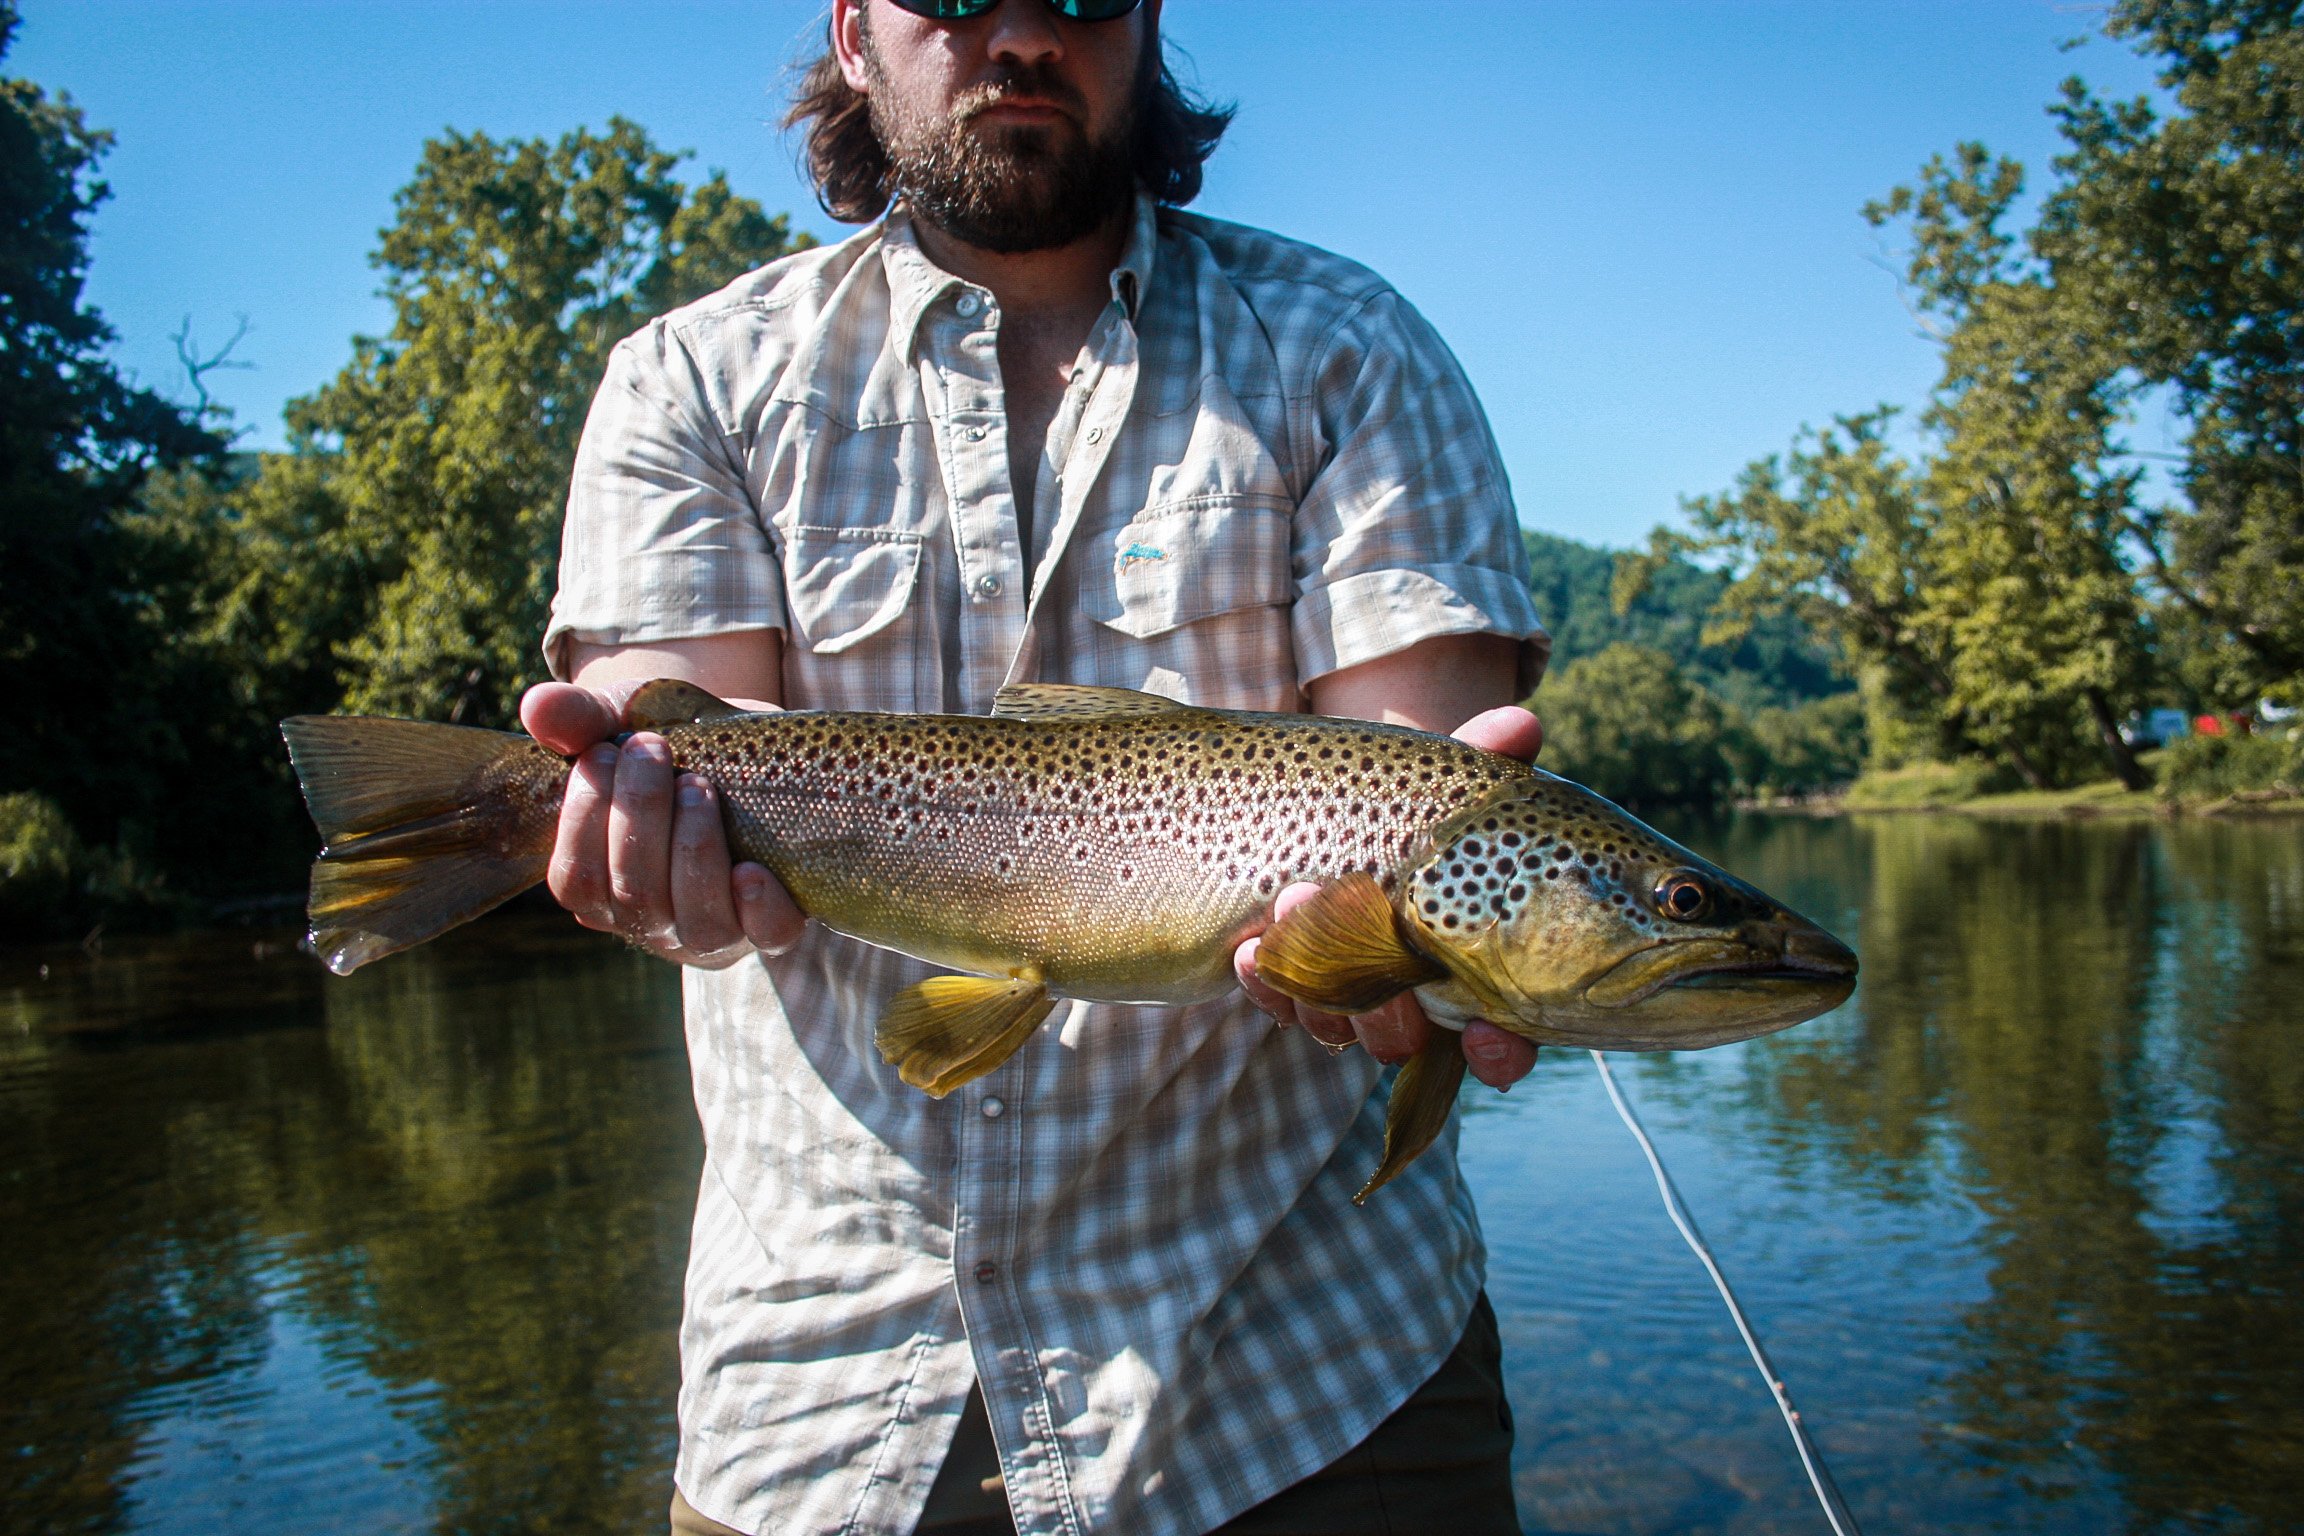 The Specked Trout Outfitters